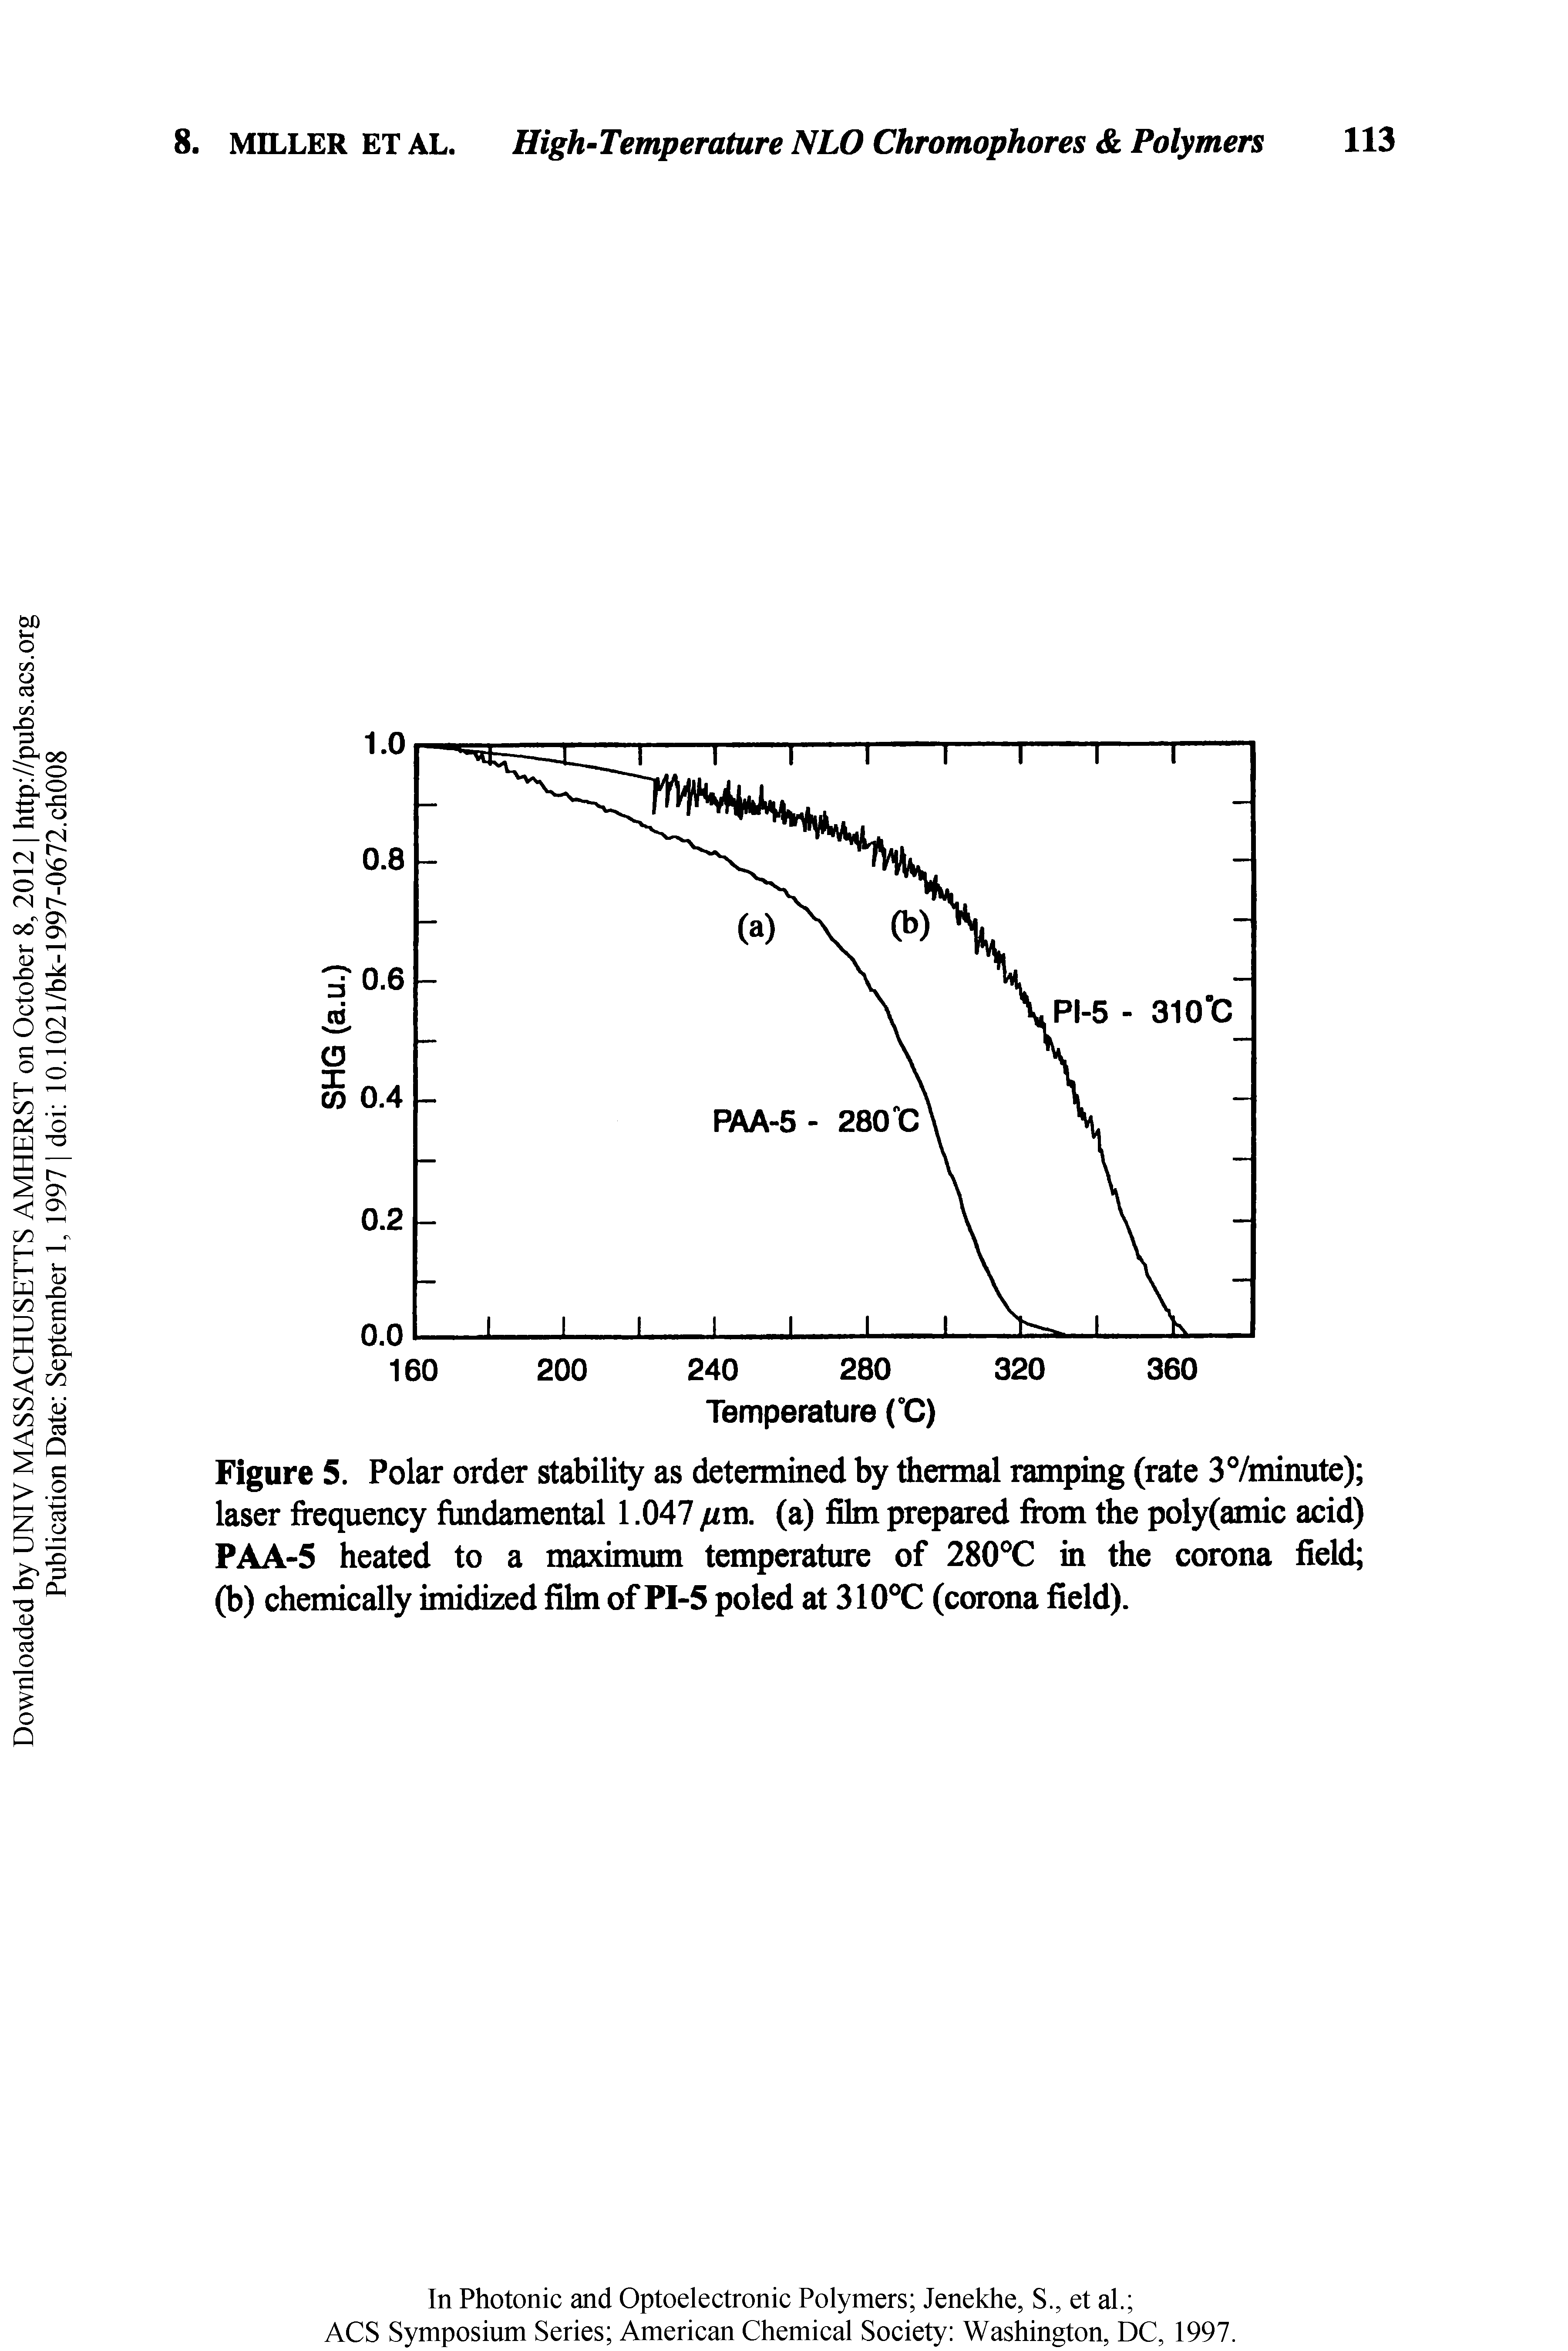 Figure 5. Polar order stability as determined by thermal ramping (rate 37minute) laser frequency fundamental 1.047 //m. (a) film prepared from the poly(amic acid) PAA-5 heated to a maximum temperature of 280°C in the corona field (b) chemically imidized film of PI-5 poled at 310°C (corona field).